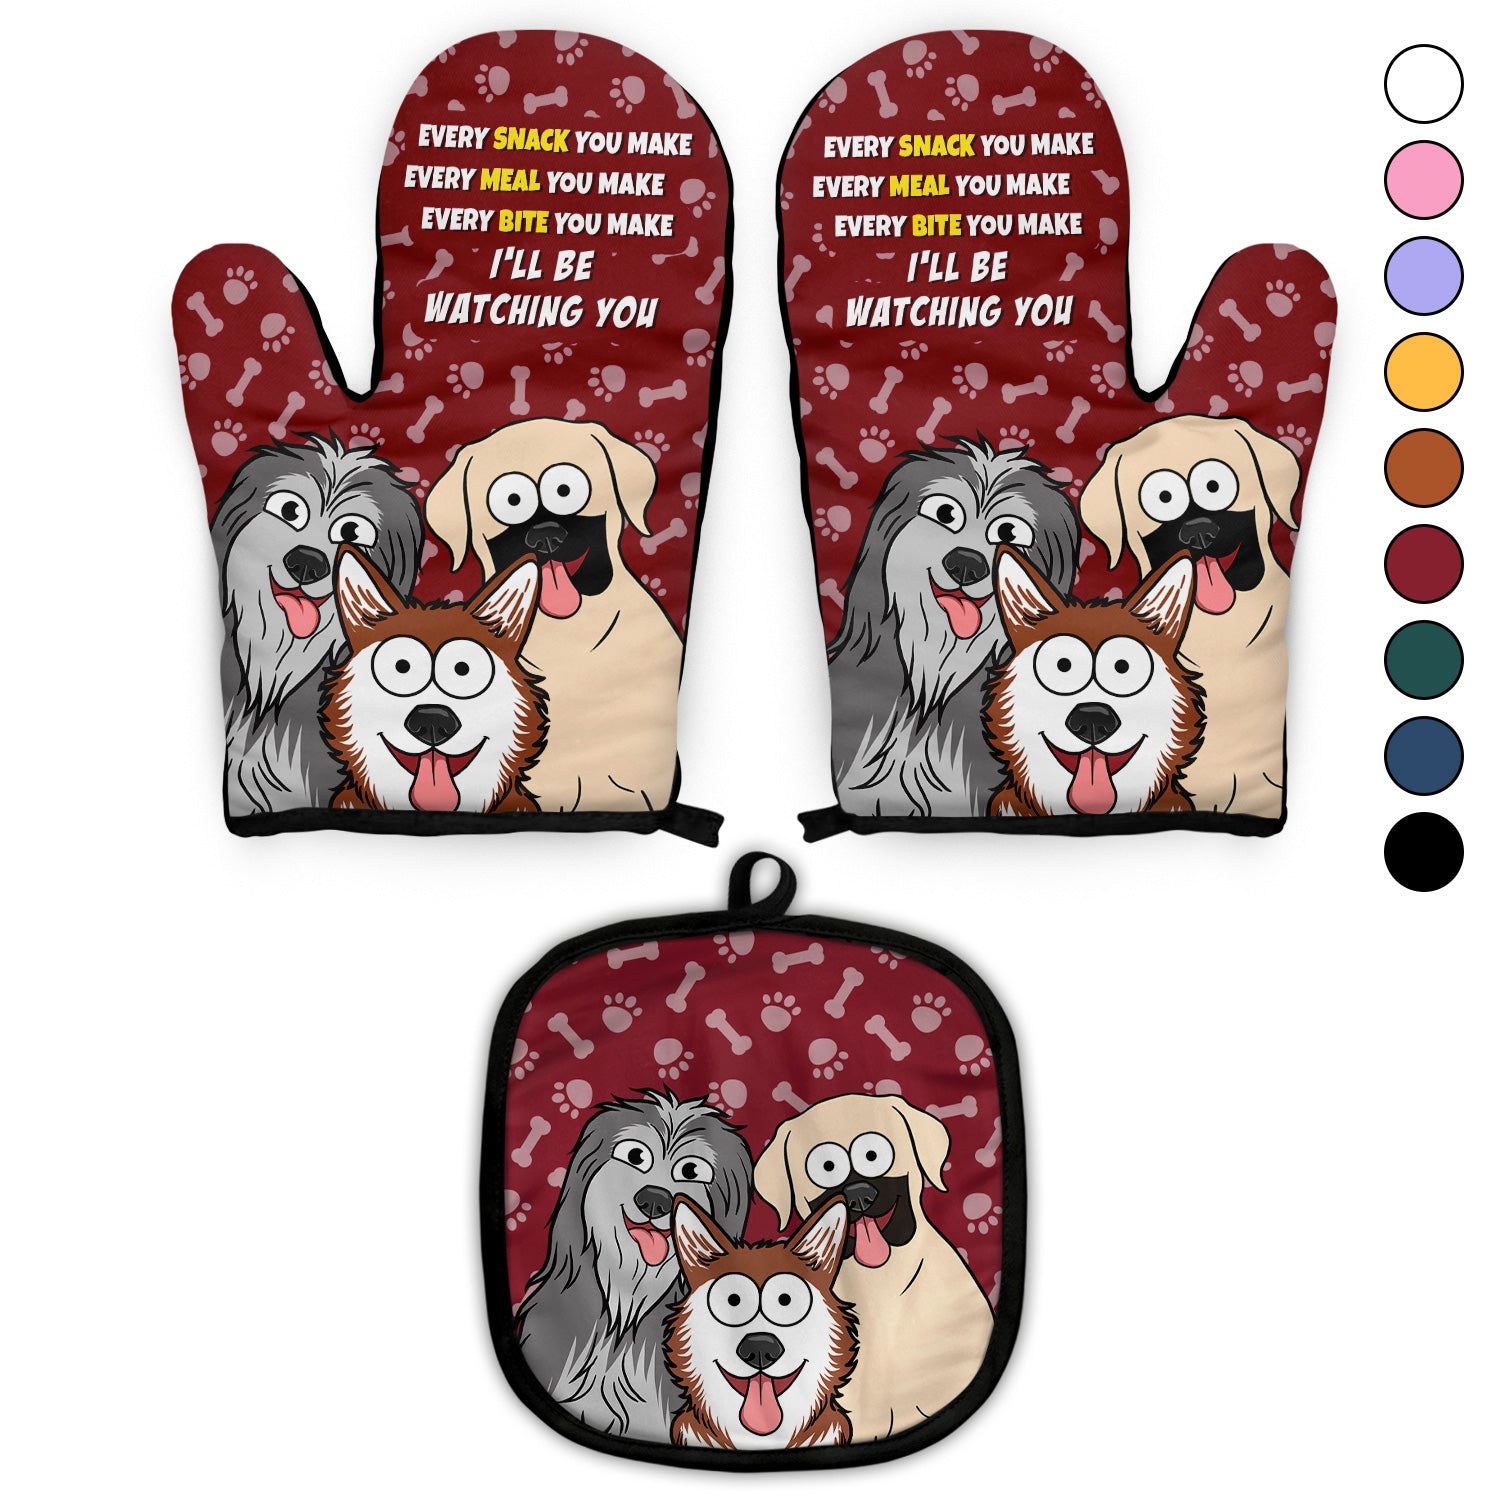 Every Snack You Make Cartoon Dog - Funny Gift For Dog Lovers - Personalized Oven Mitts, Pot Holders